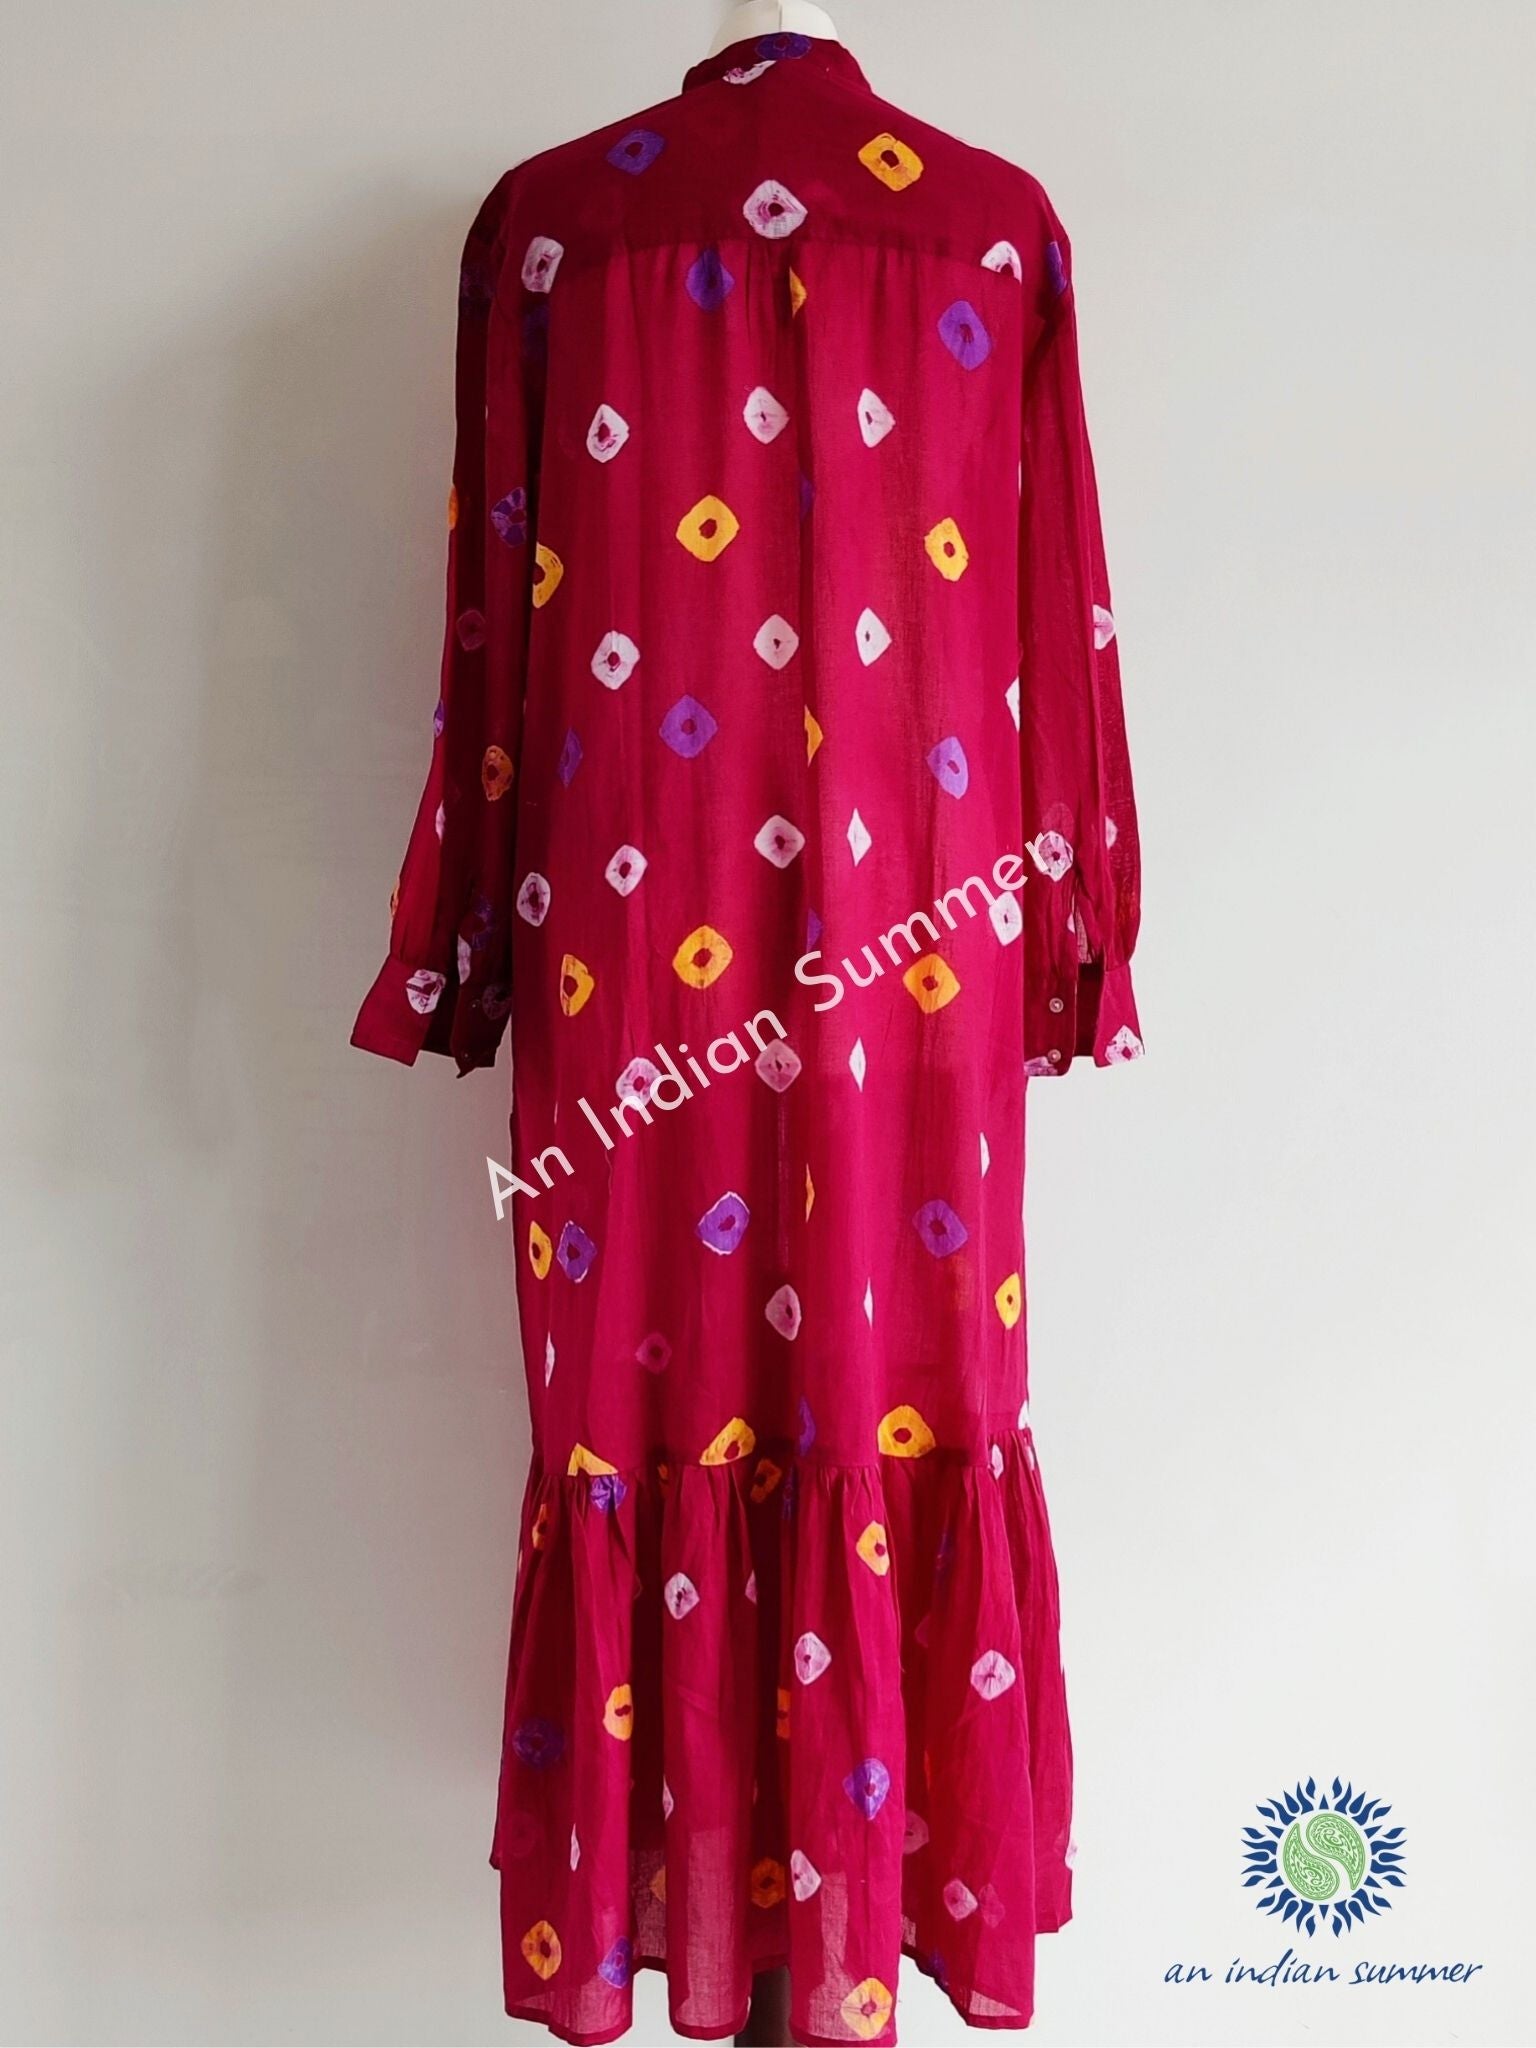 Aditi Bandhani Dress Garnet Red | Hand Tie Dyed | An Indian Summer | Seasonless Timeless Sustainable Ethical Authentic Artisan Conscious Clothing Lifestyle Brand